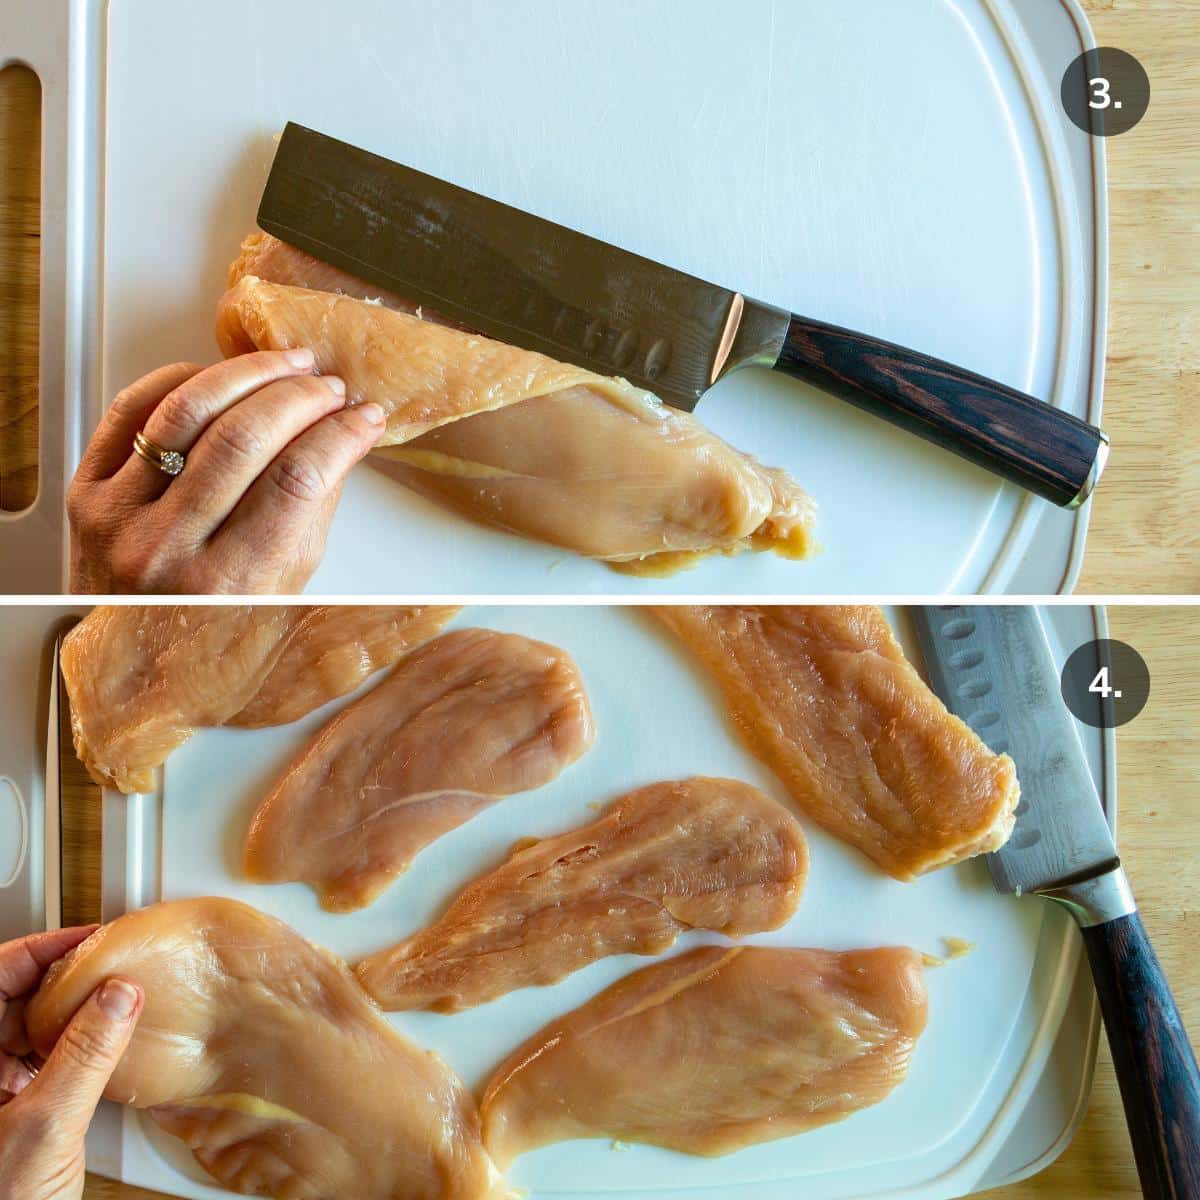 Slicing the chicken breast into thin cutlets.